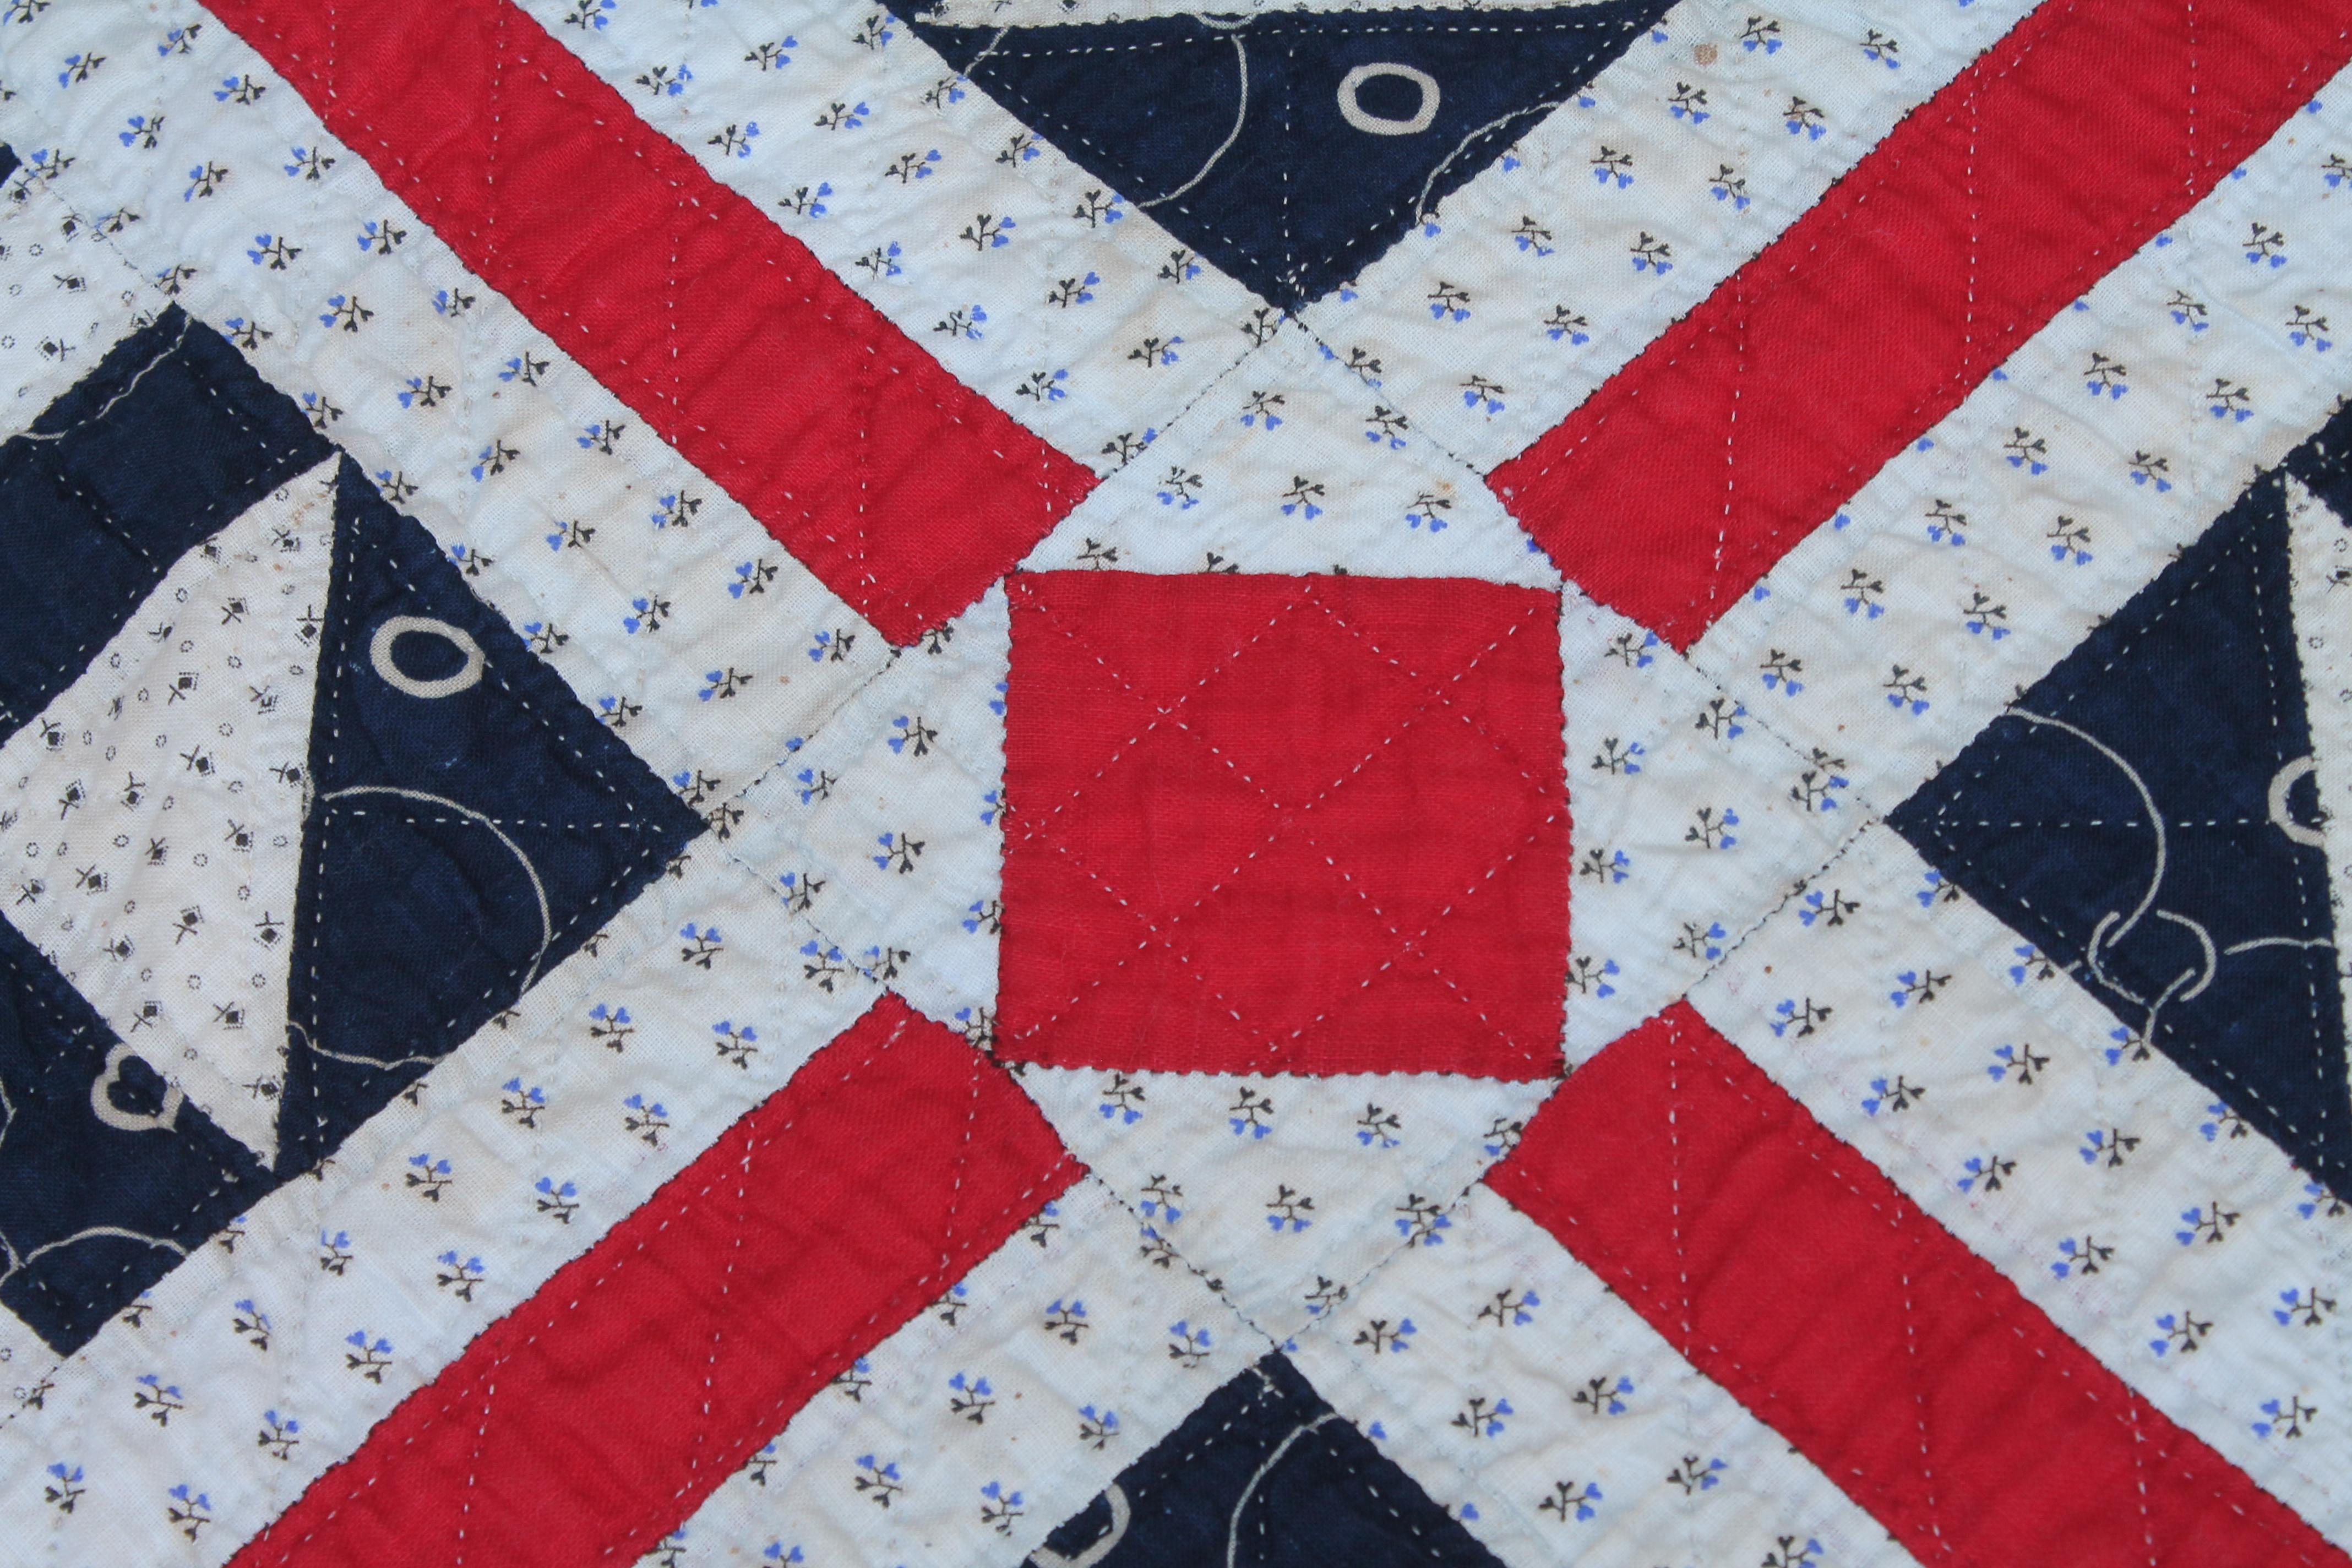 Hand-Crafted 19thc Geometric Patriotic Quilt in Railroad Crossings